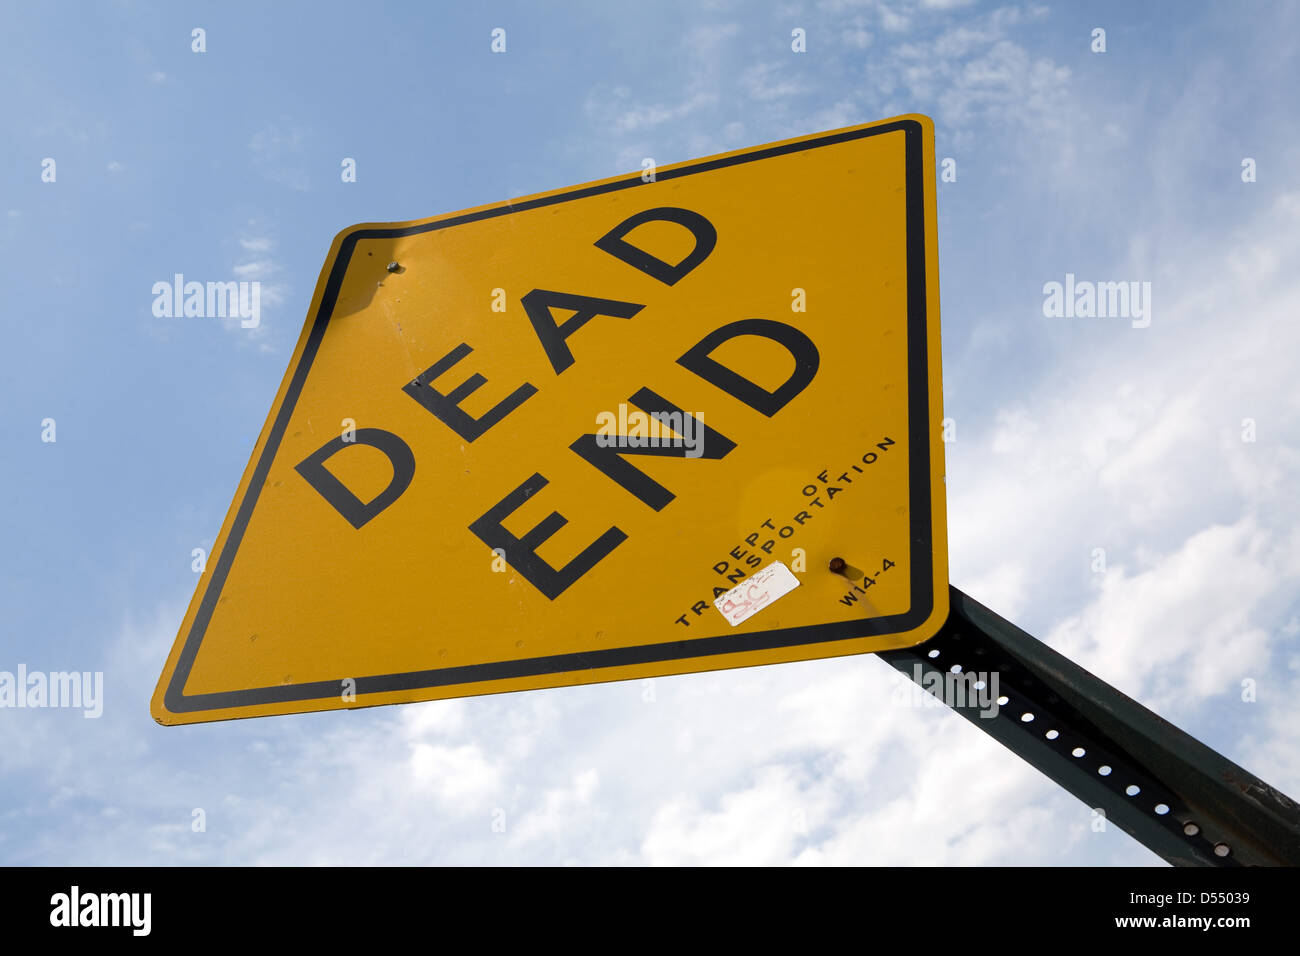 W14-1 Dead End Sign